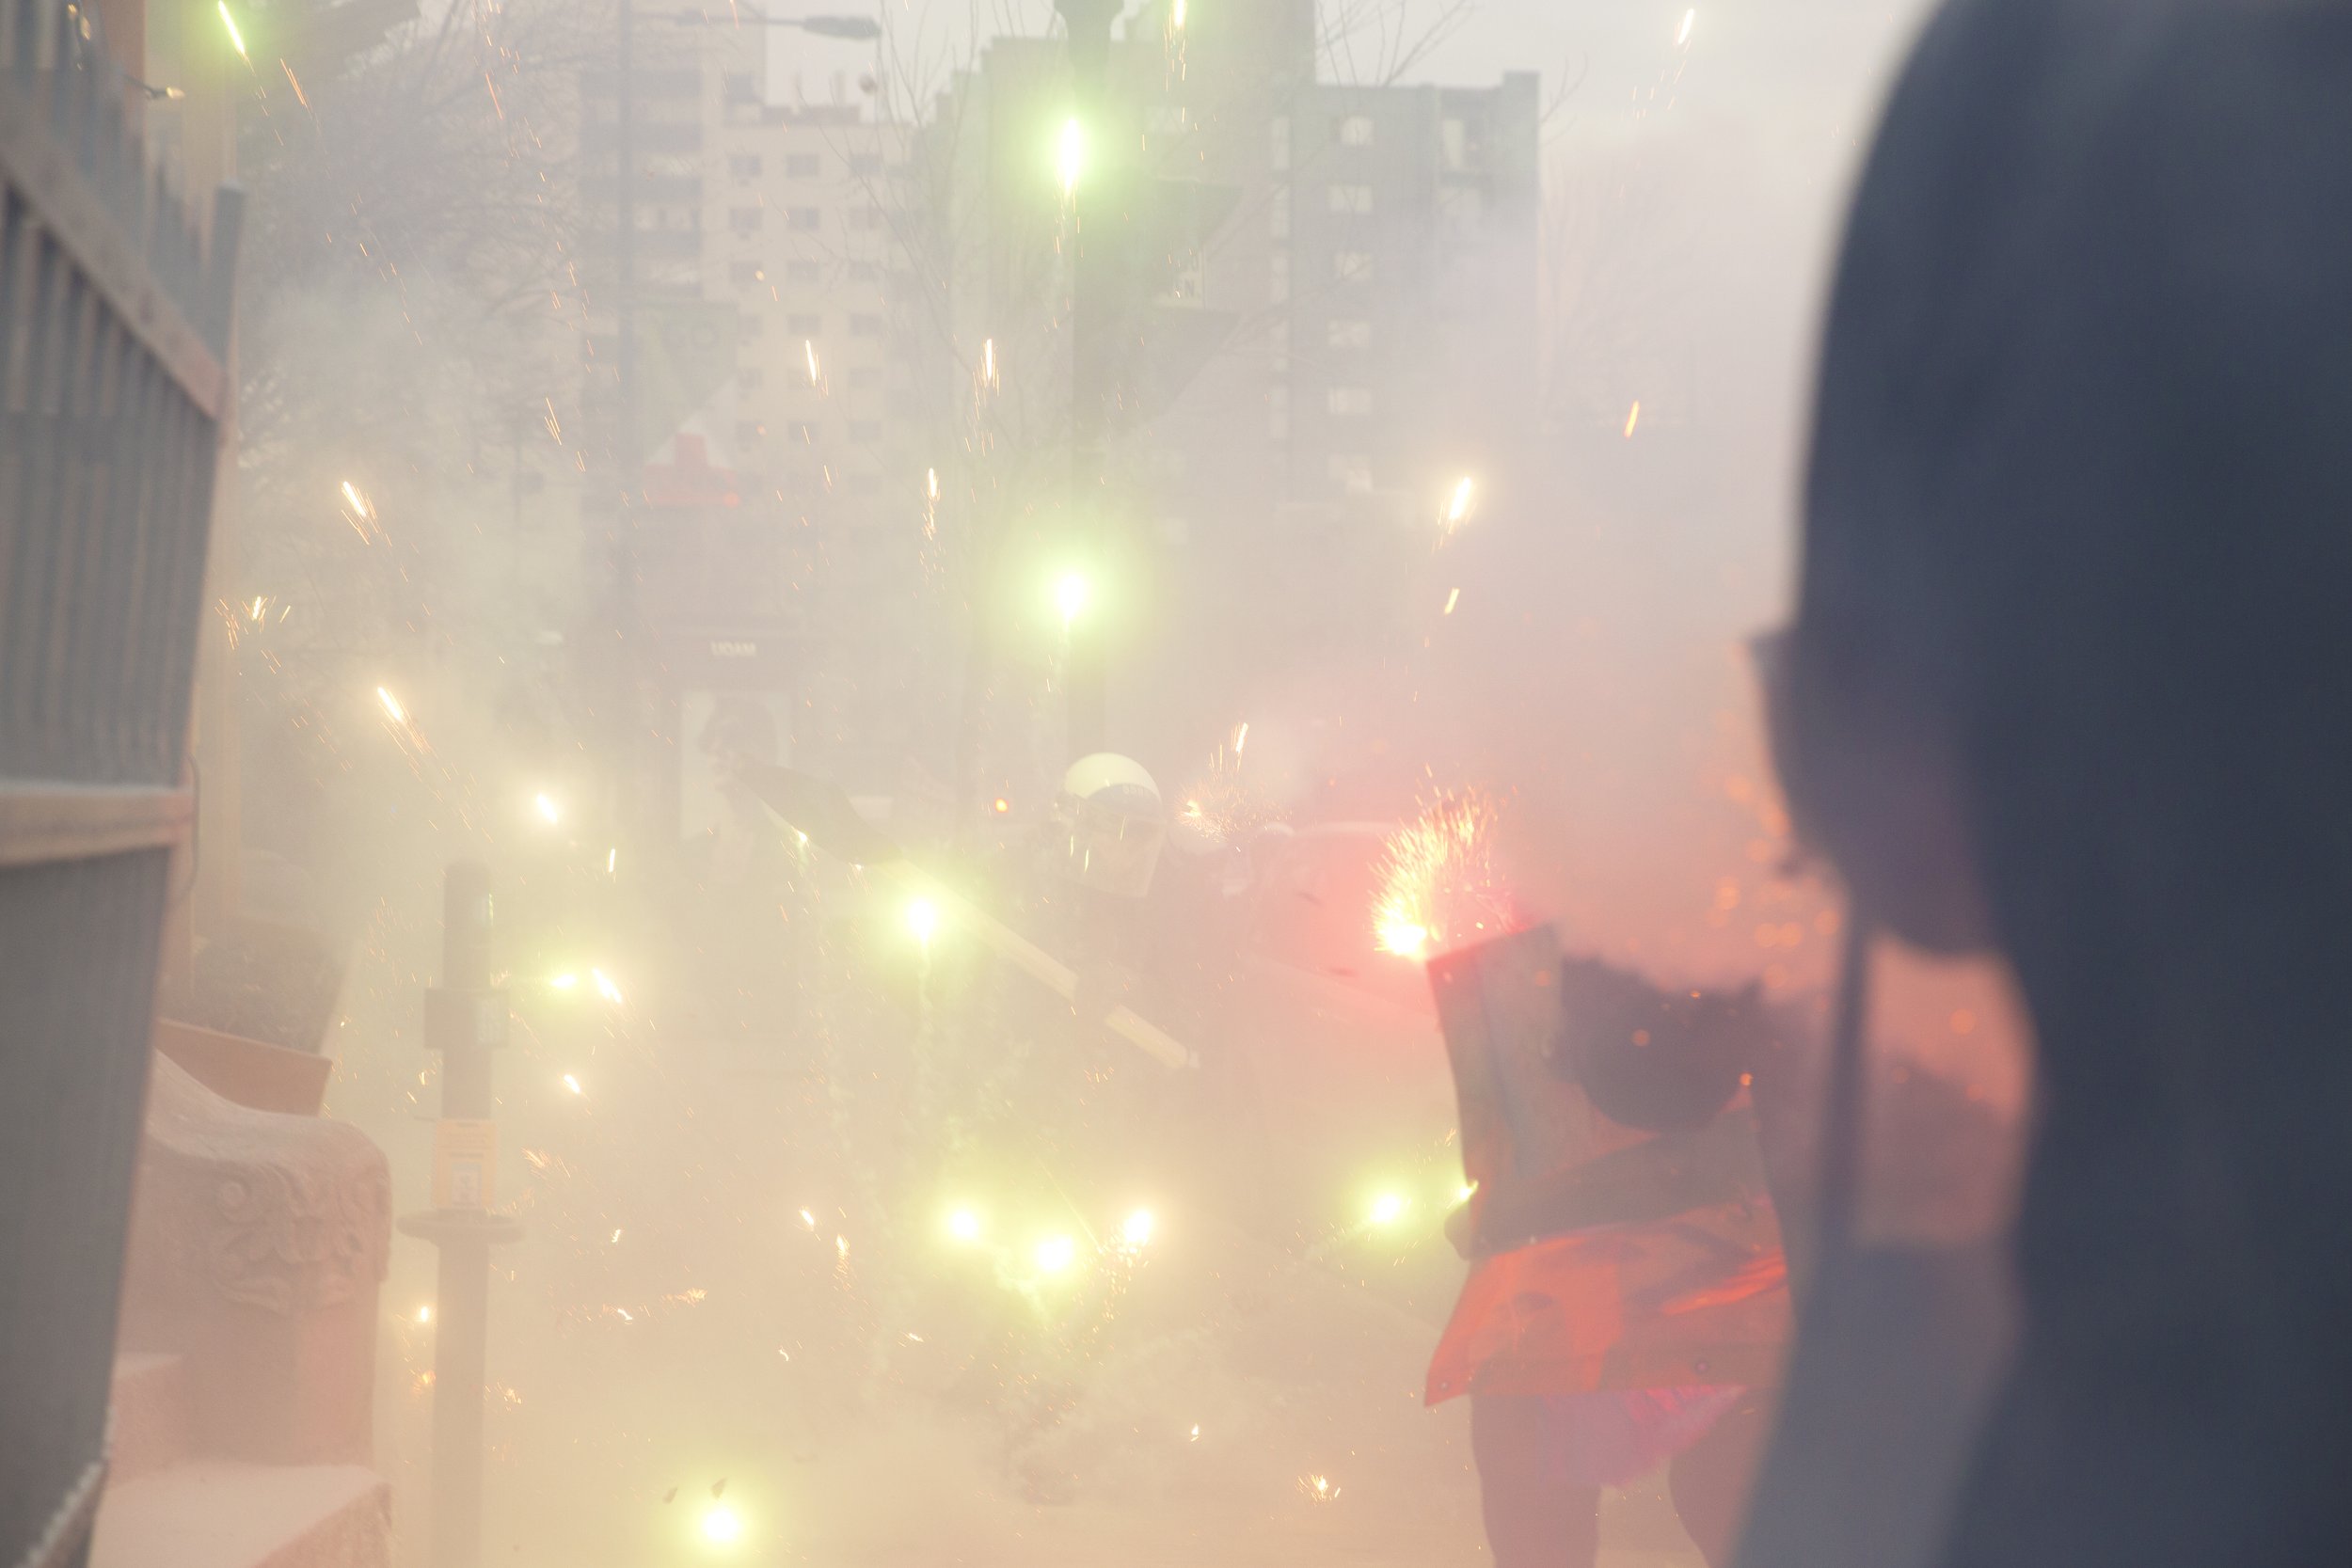  Protesters shoot fireworks at Montreal police during a May Day demonstration. May 1 2018.  